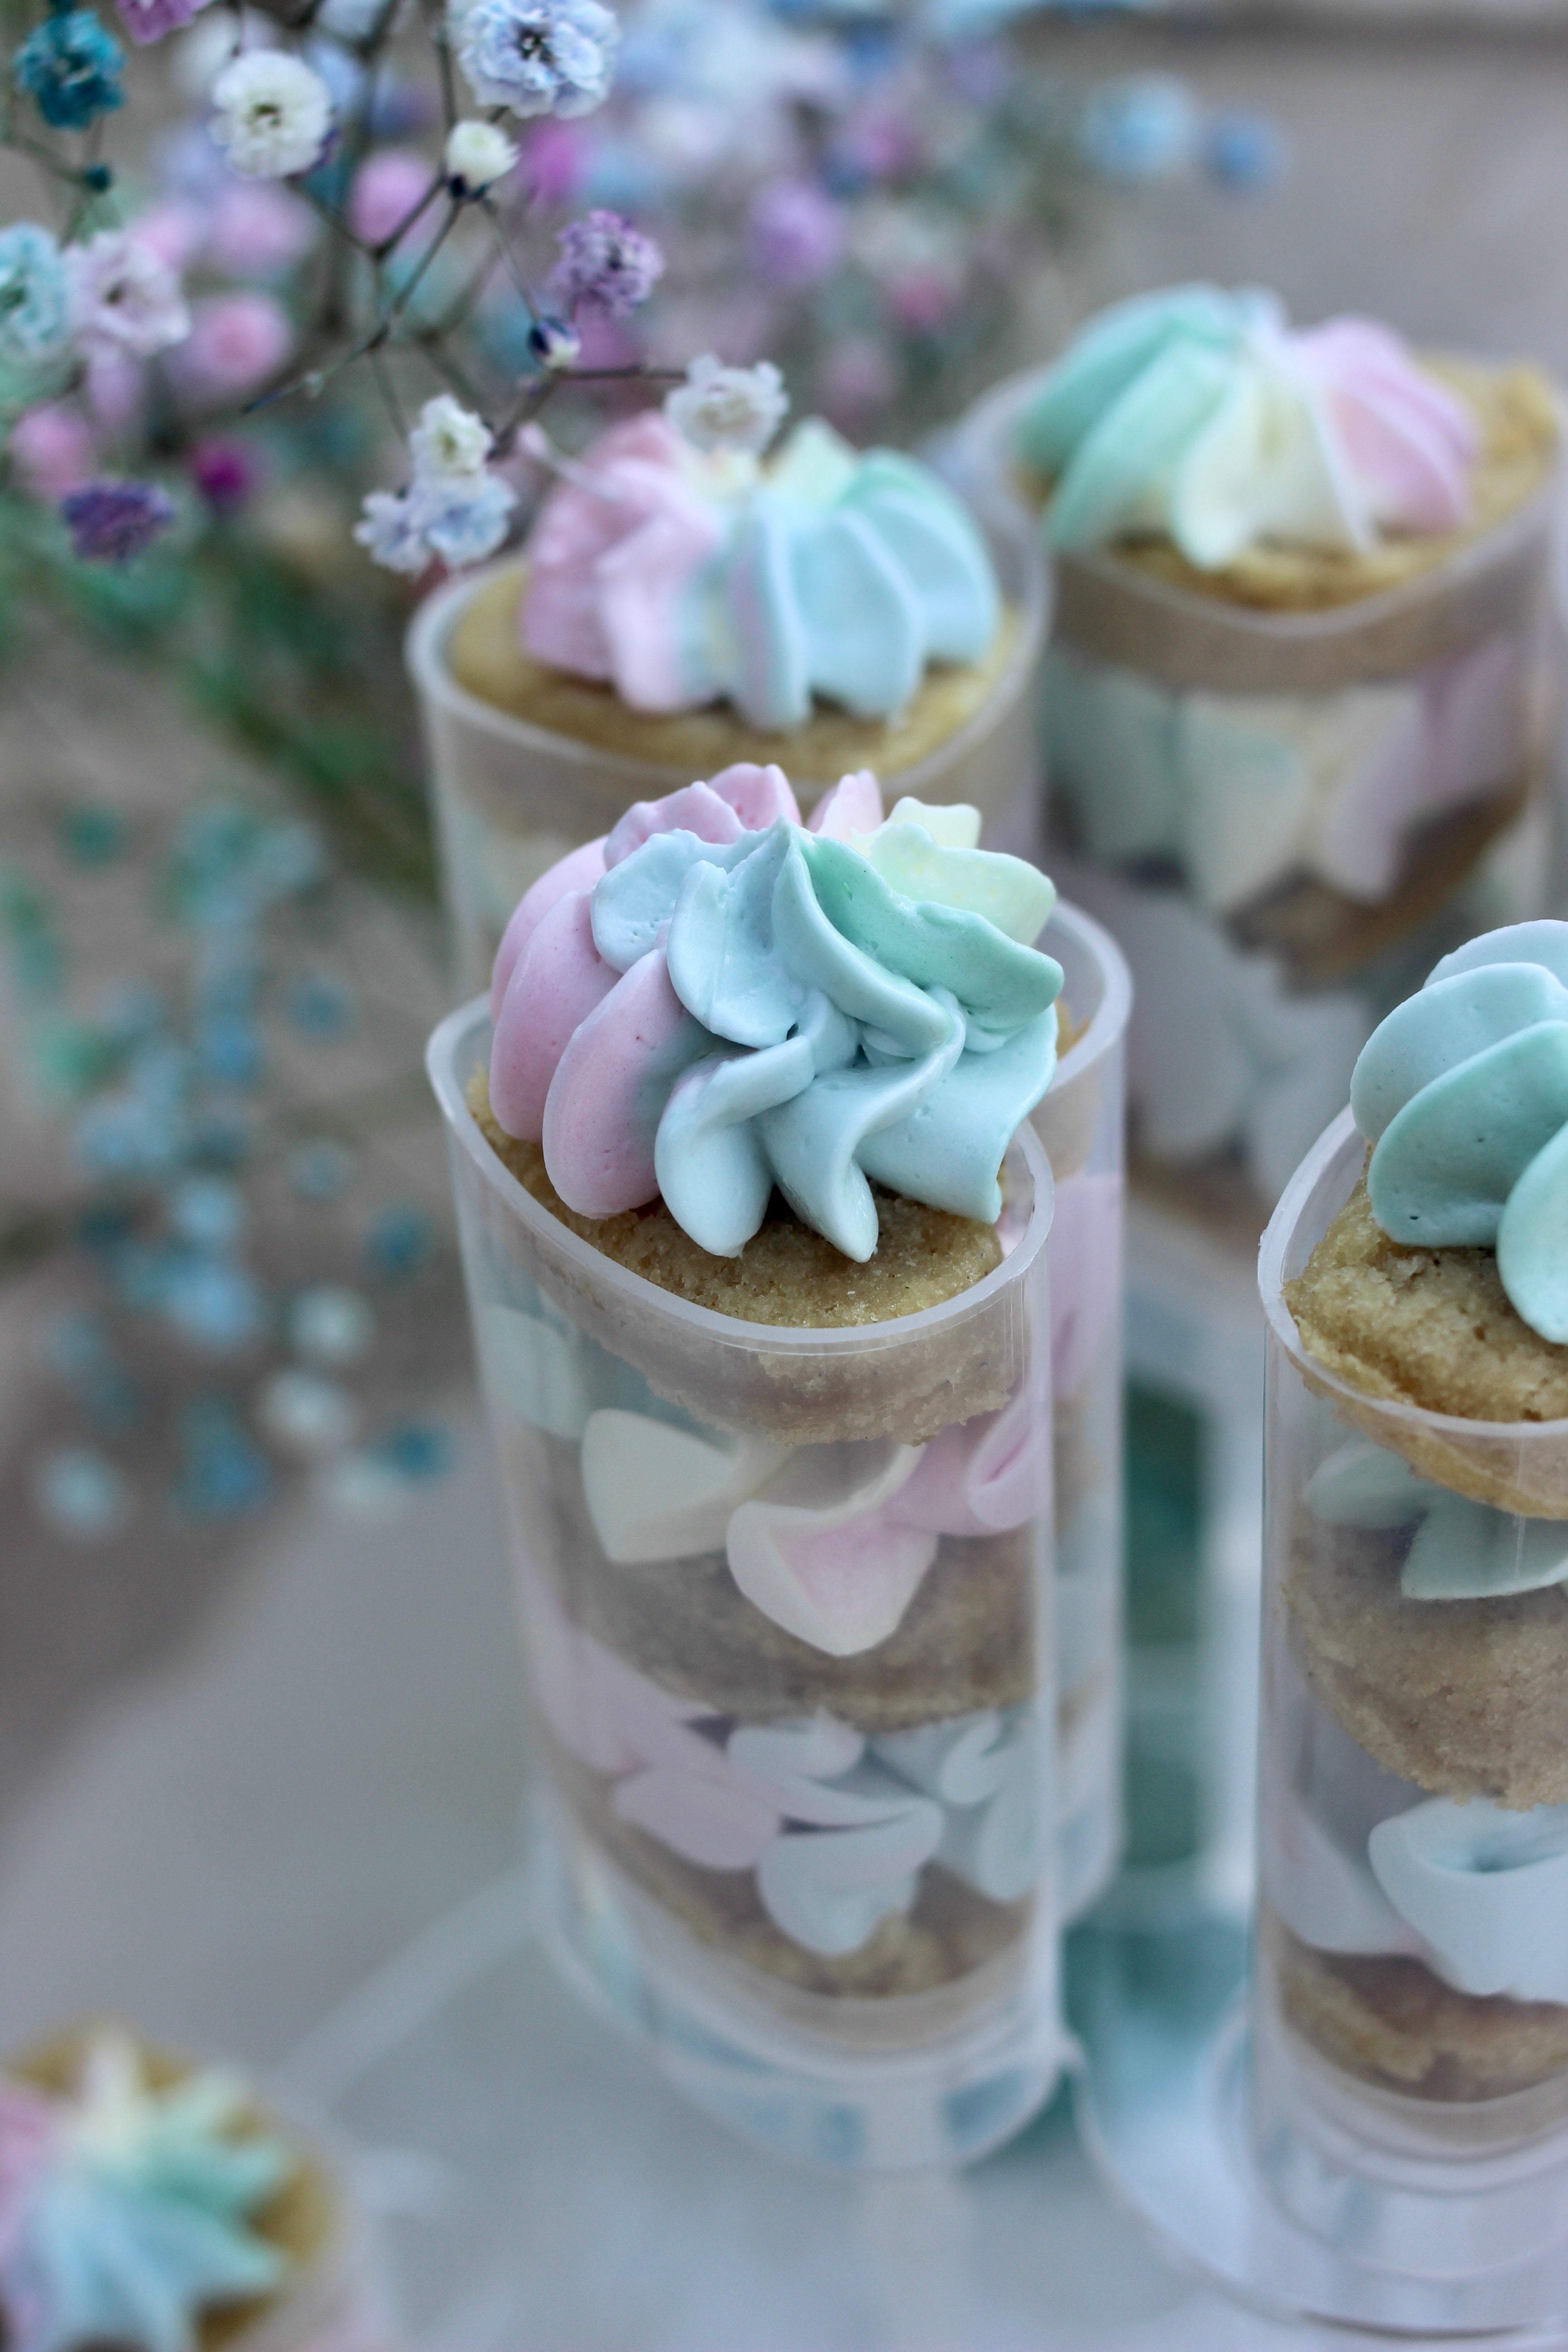 This Is What Happens When Cake Pops and Push Pops Collide - Delish.com